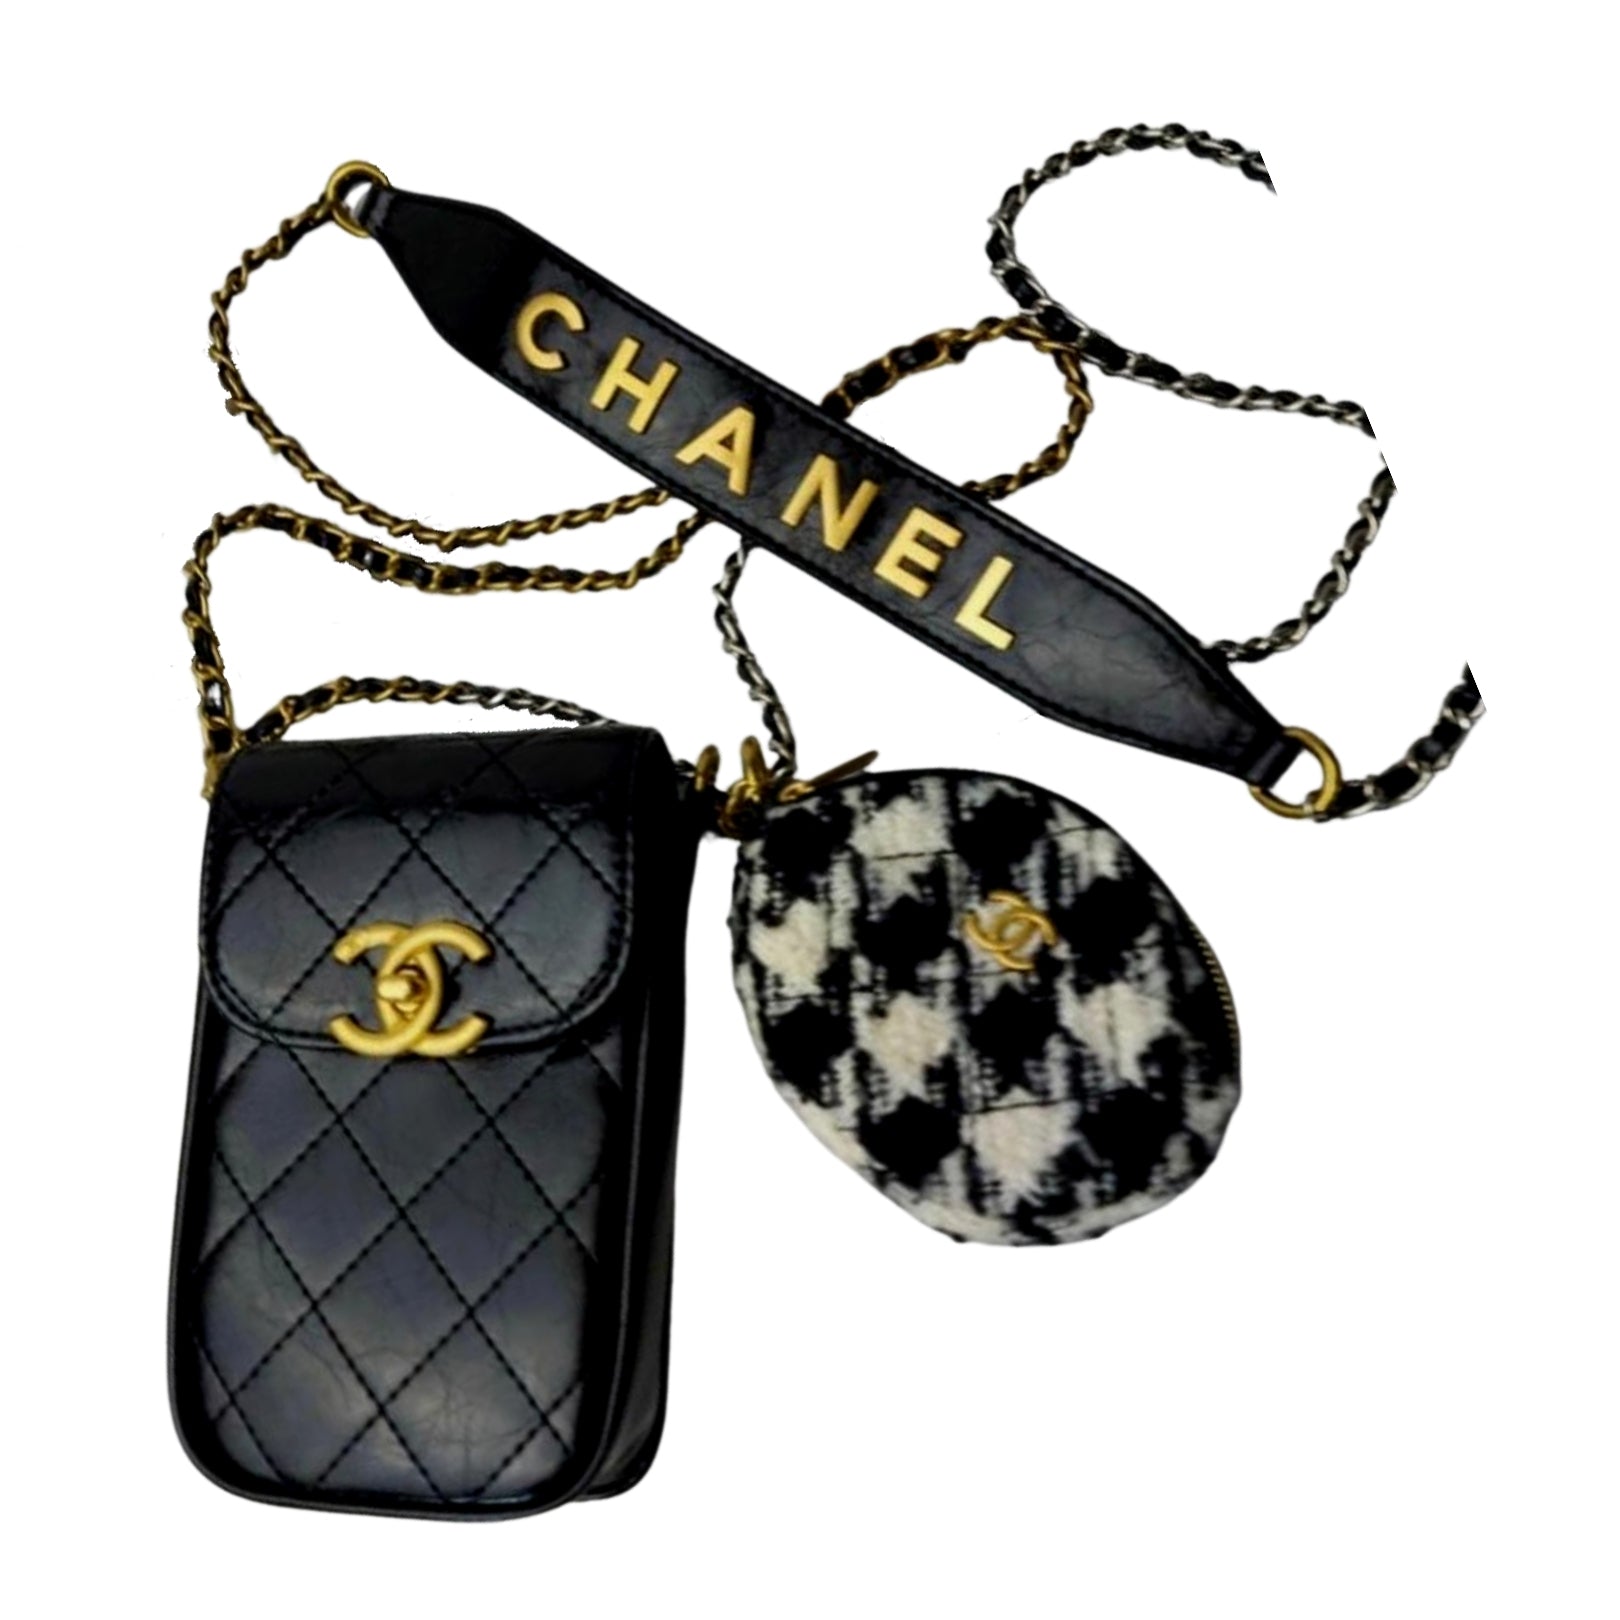 CHANEL, Bags, One Day Sale New Vip Crossbody Phone Pouch